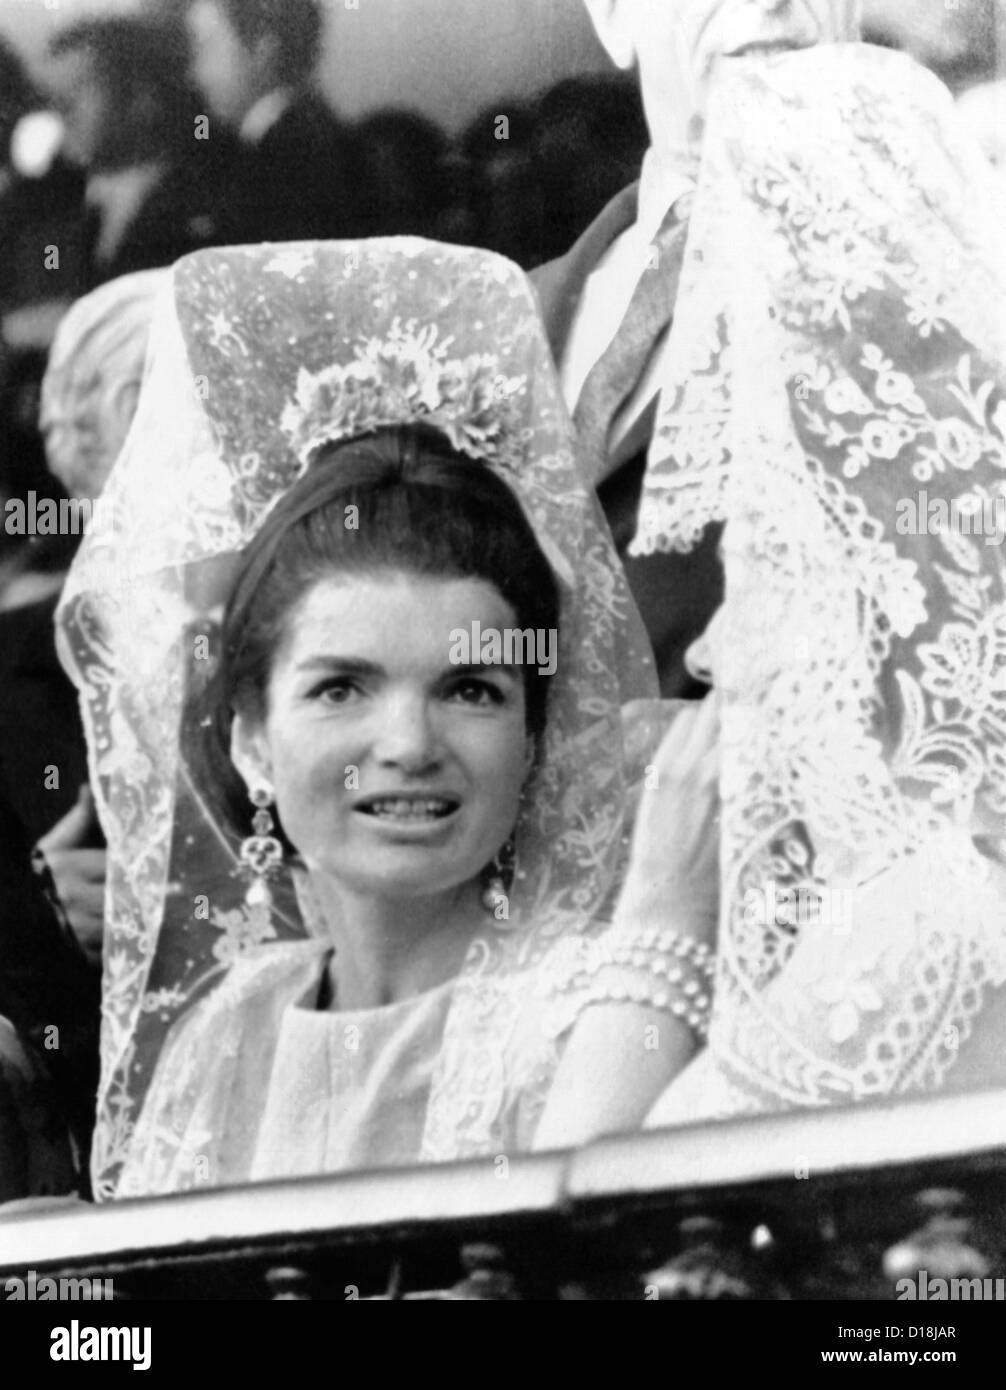 Jacqueline Kennedy wears a traditional lace mantilla to the bullfights in Seville, Spain. April 21, 1966 (CSU ALPHA 782) CSU Stock Photo